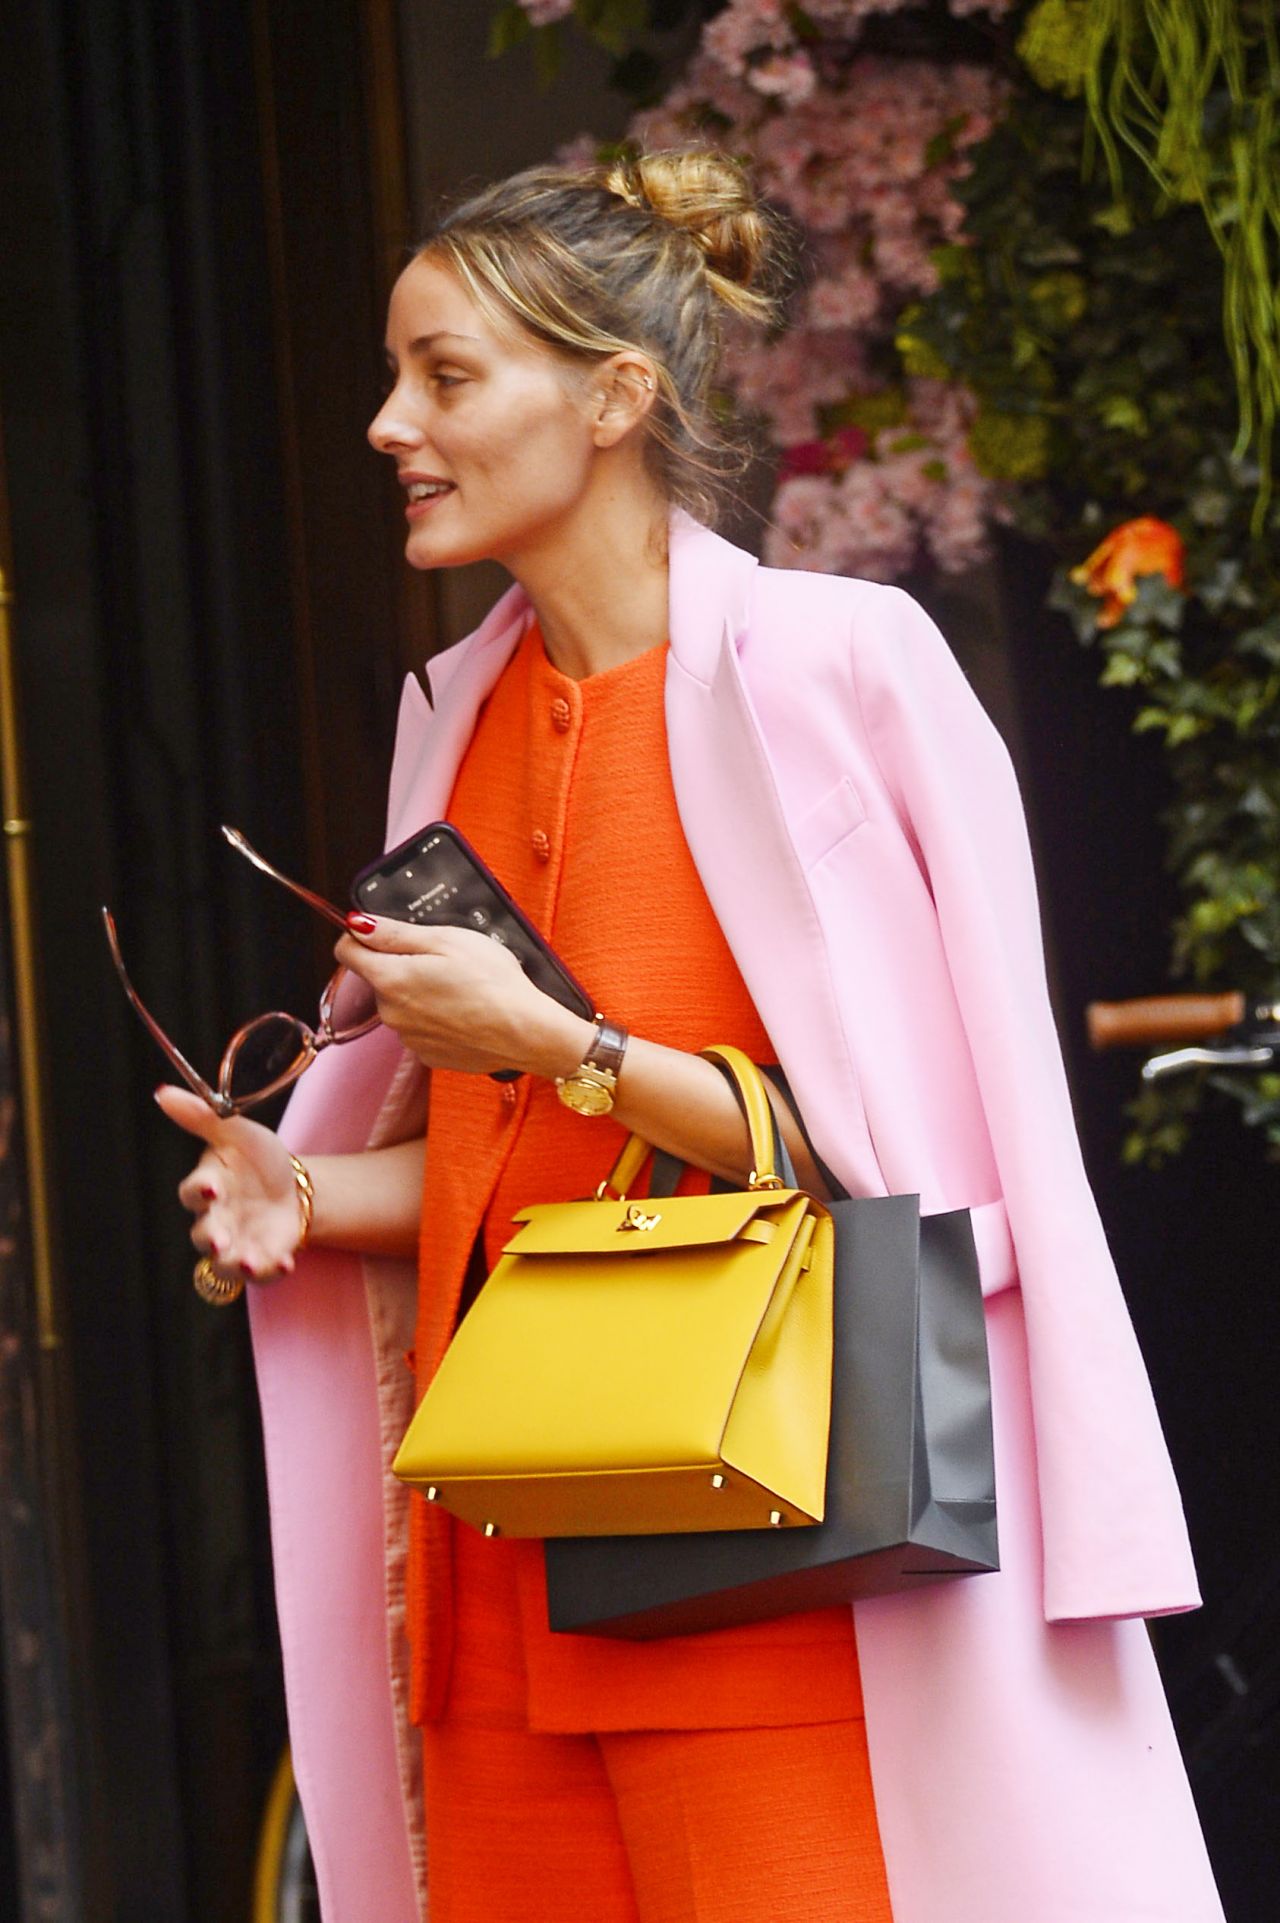 Who made Olivia Palermo's yellow handbag, red print argyle cardigan  sweater, and tassel loafer shoes? – OutfitID